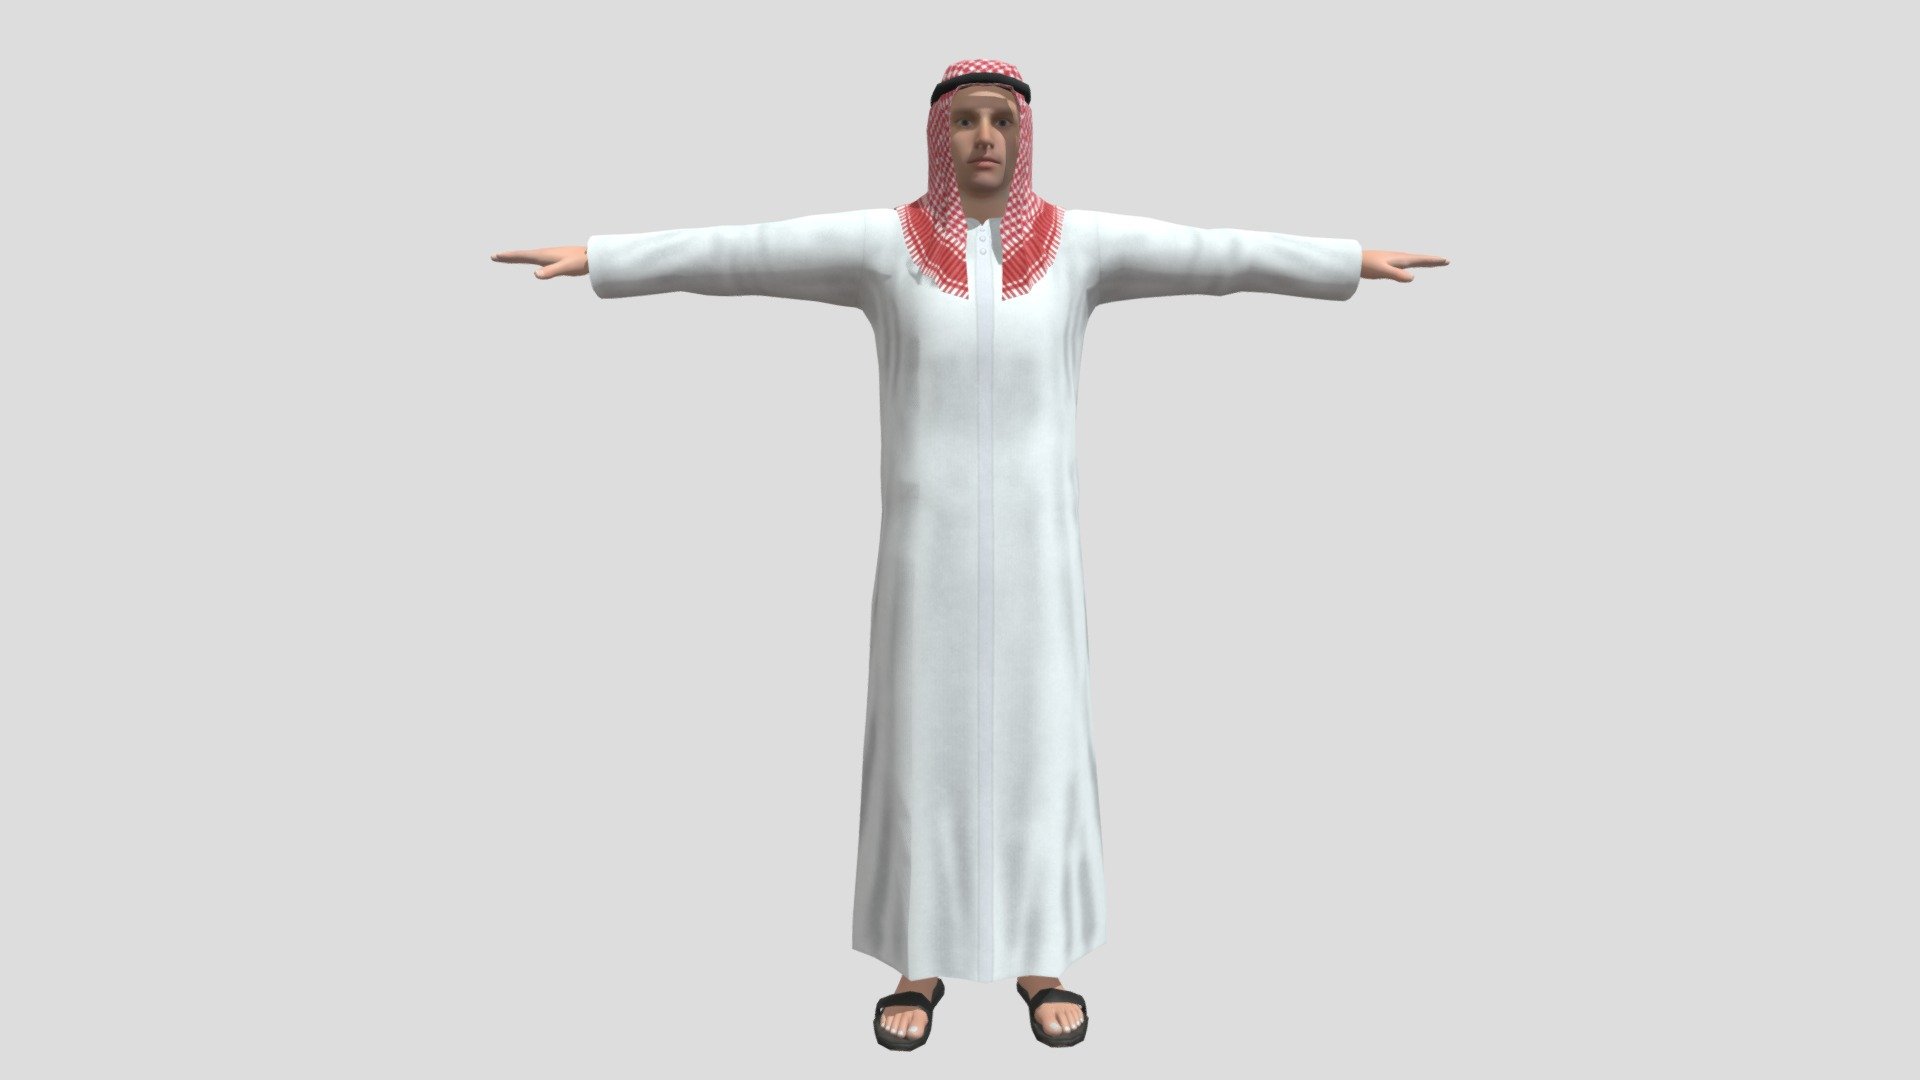 Description:
Arab Male 3D model is a high quality, photo real model that will enhance detail and realism to any of your game projects or commercials. The model has a fully textured, detailed design that allows for close-up renders. 
Features:
• High quality polygonal model with detailed texture, correctly scaled for an accurate representation of the original object.
• Maya 2019 V-Ray and standard materials scenes along with multiple other file formats.
• Texture files are given in .jpg formats for easy access.
• All preview images are rendered using Autodesk Maya vray
• No cleaning up necessary, just drop your models into the scene, Load the texture and start rendering.
• No special plugin needed to open scene 3d model